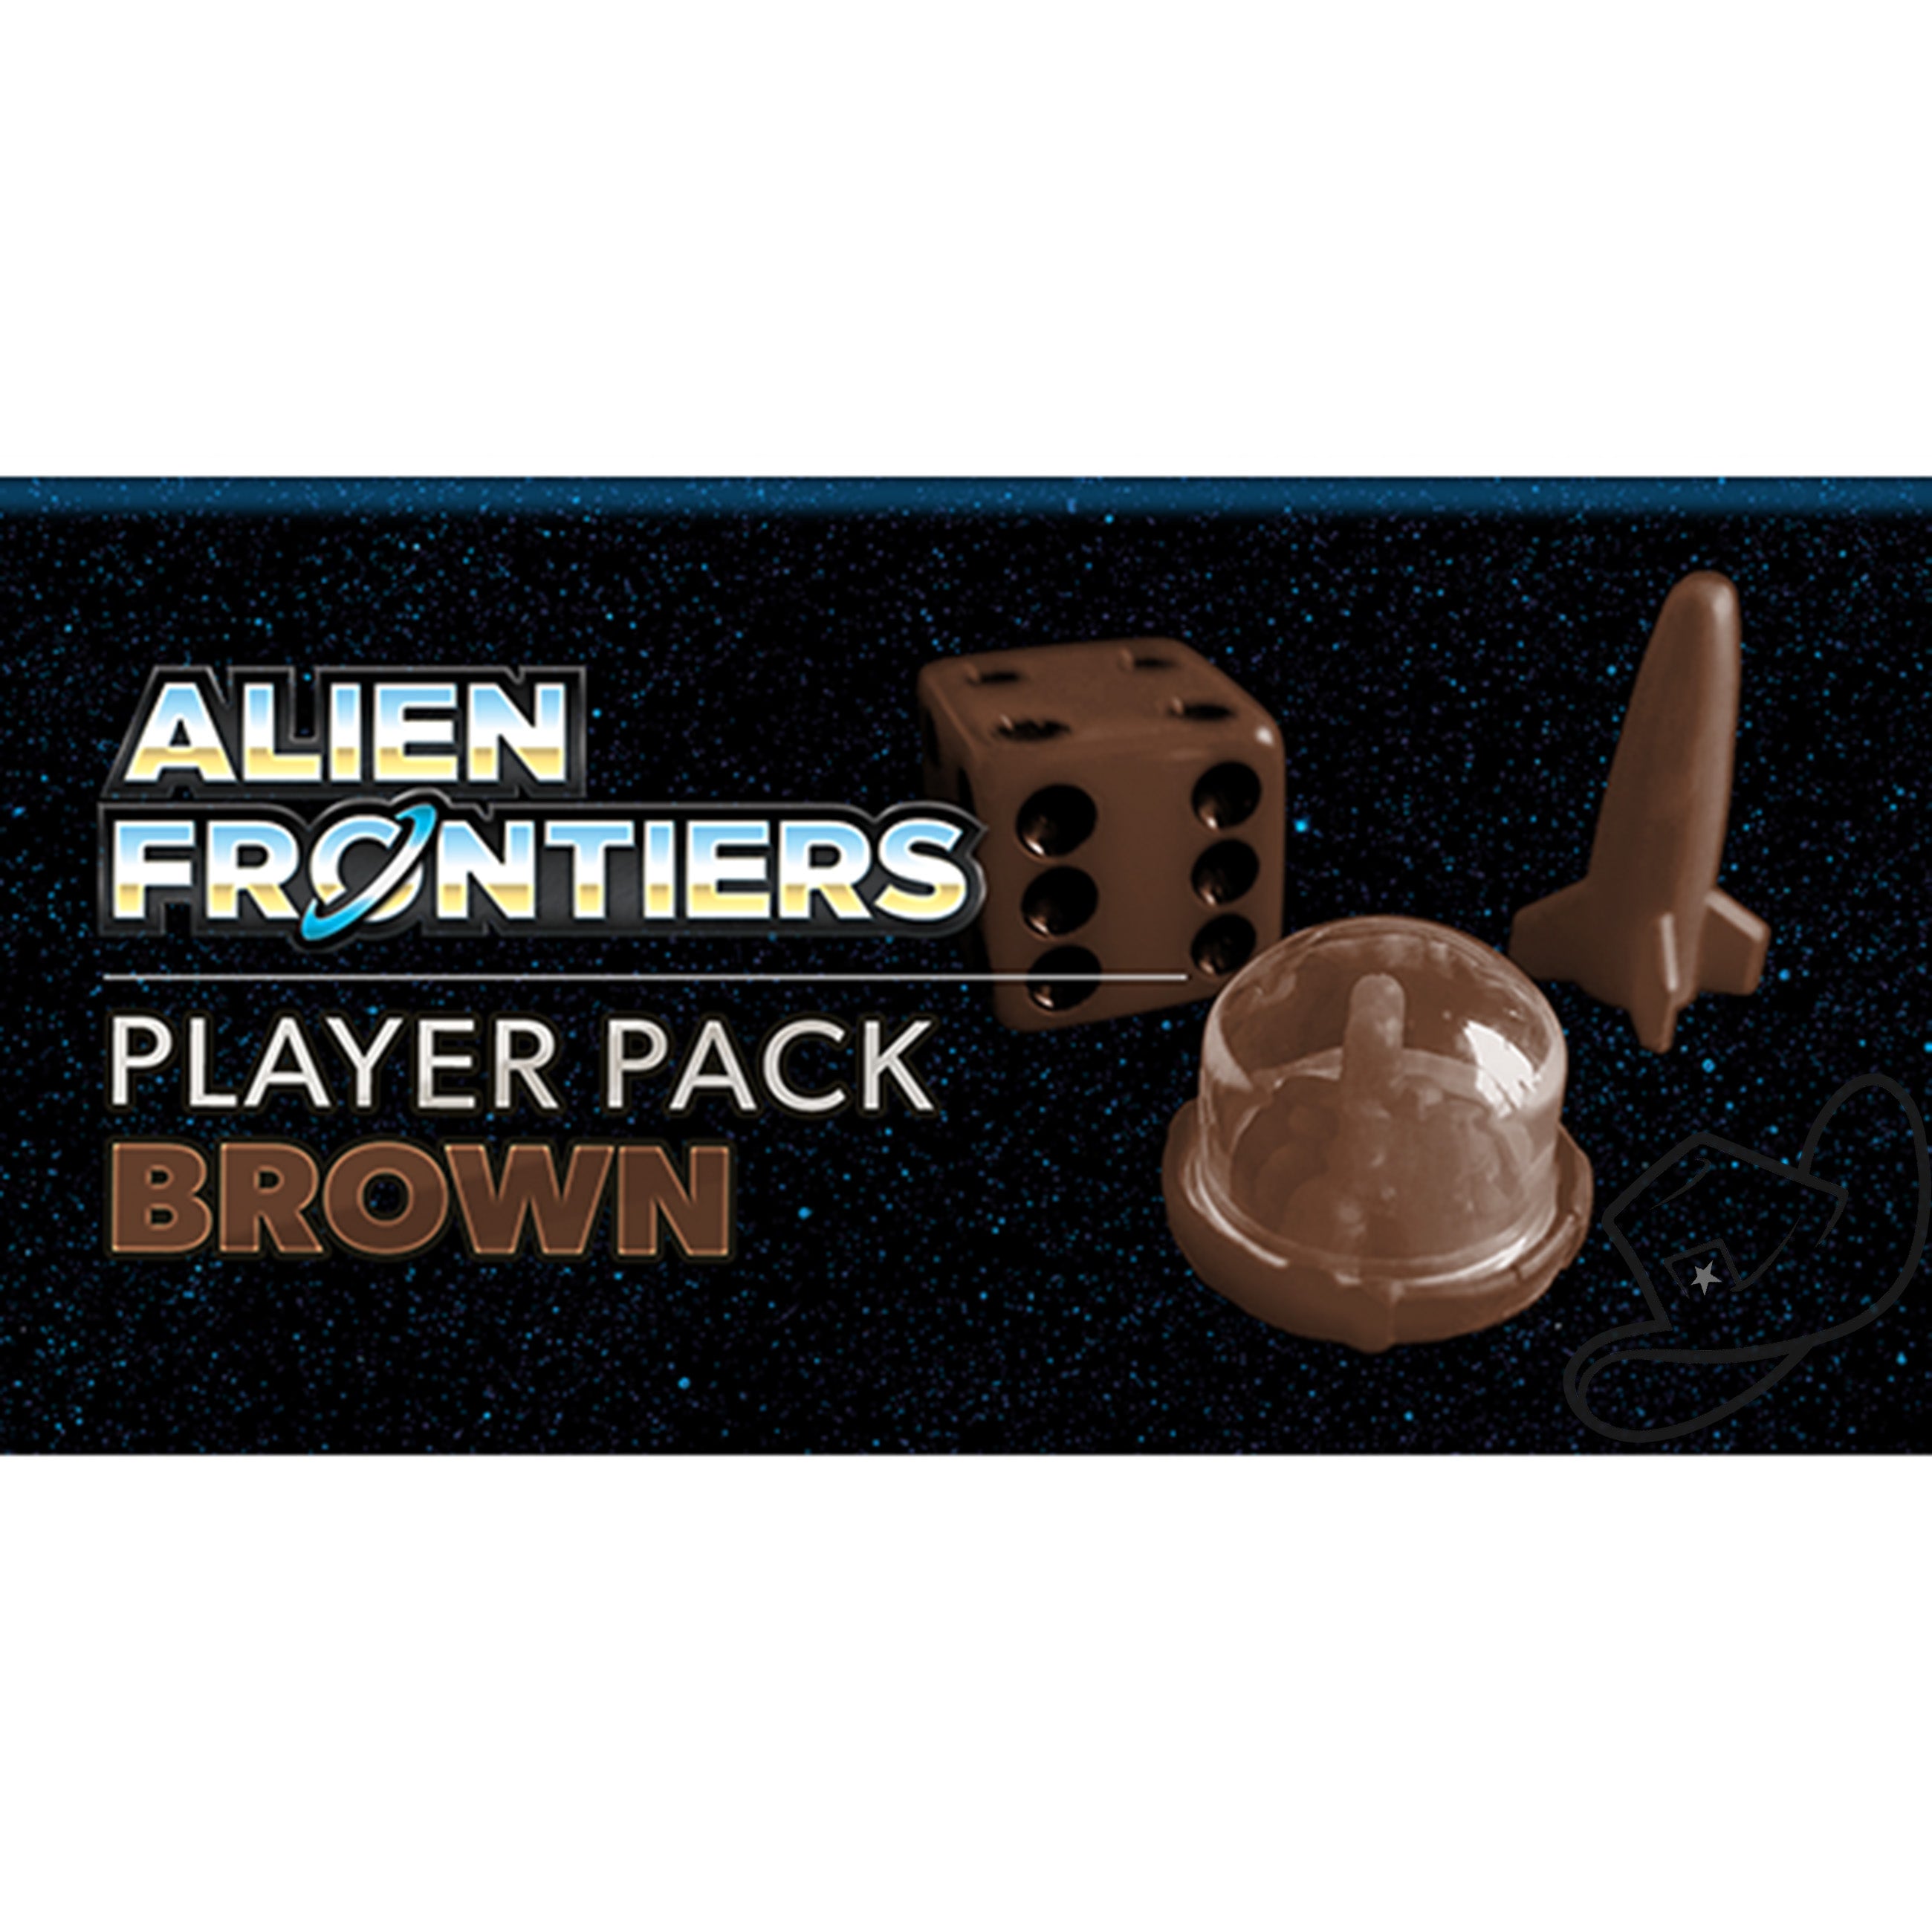 Alien frontiers players pack brown contains all the pieces needed to add a new player